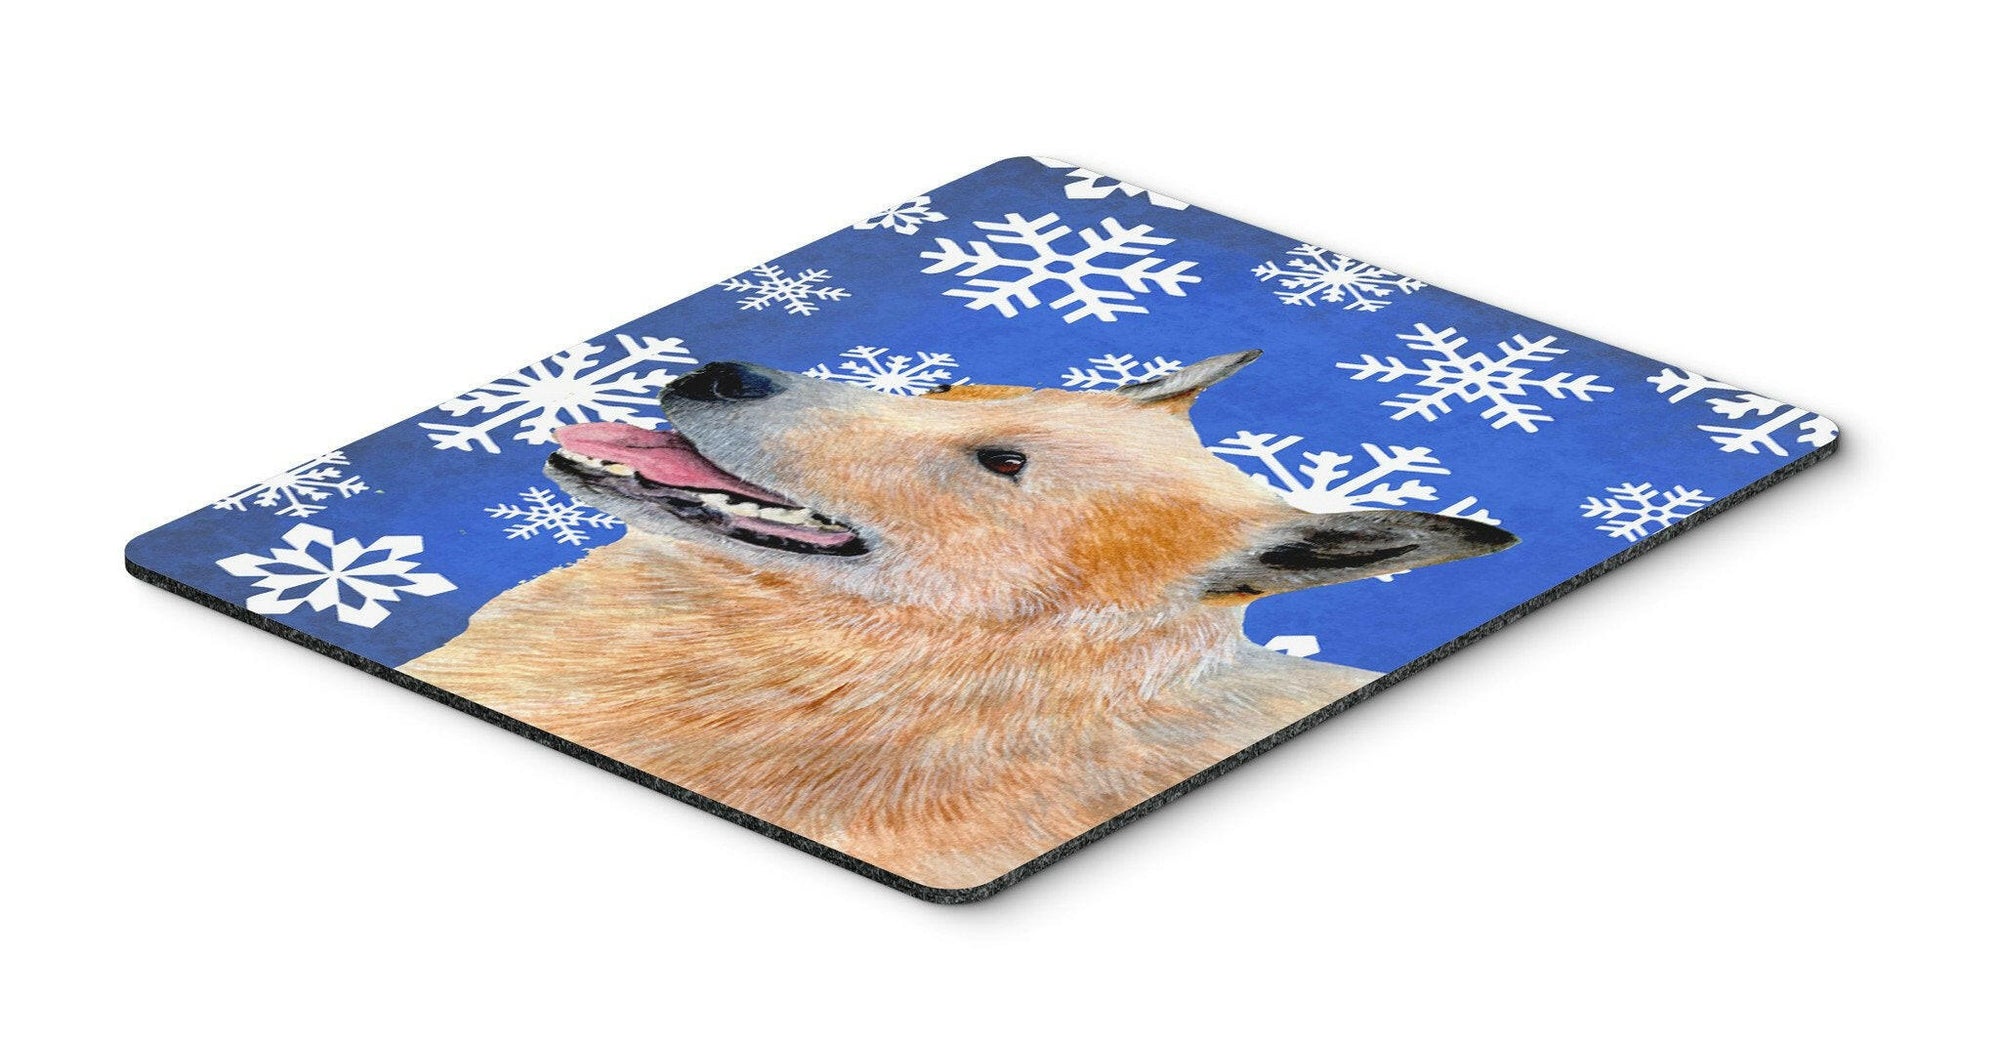 Australian Cattle Dog Winter Snowflakes Holiday Mouse Pad, Hot Pad or Trivet by Caroline's Treasures